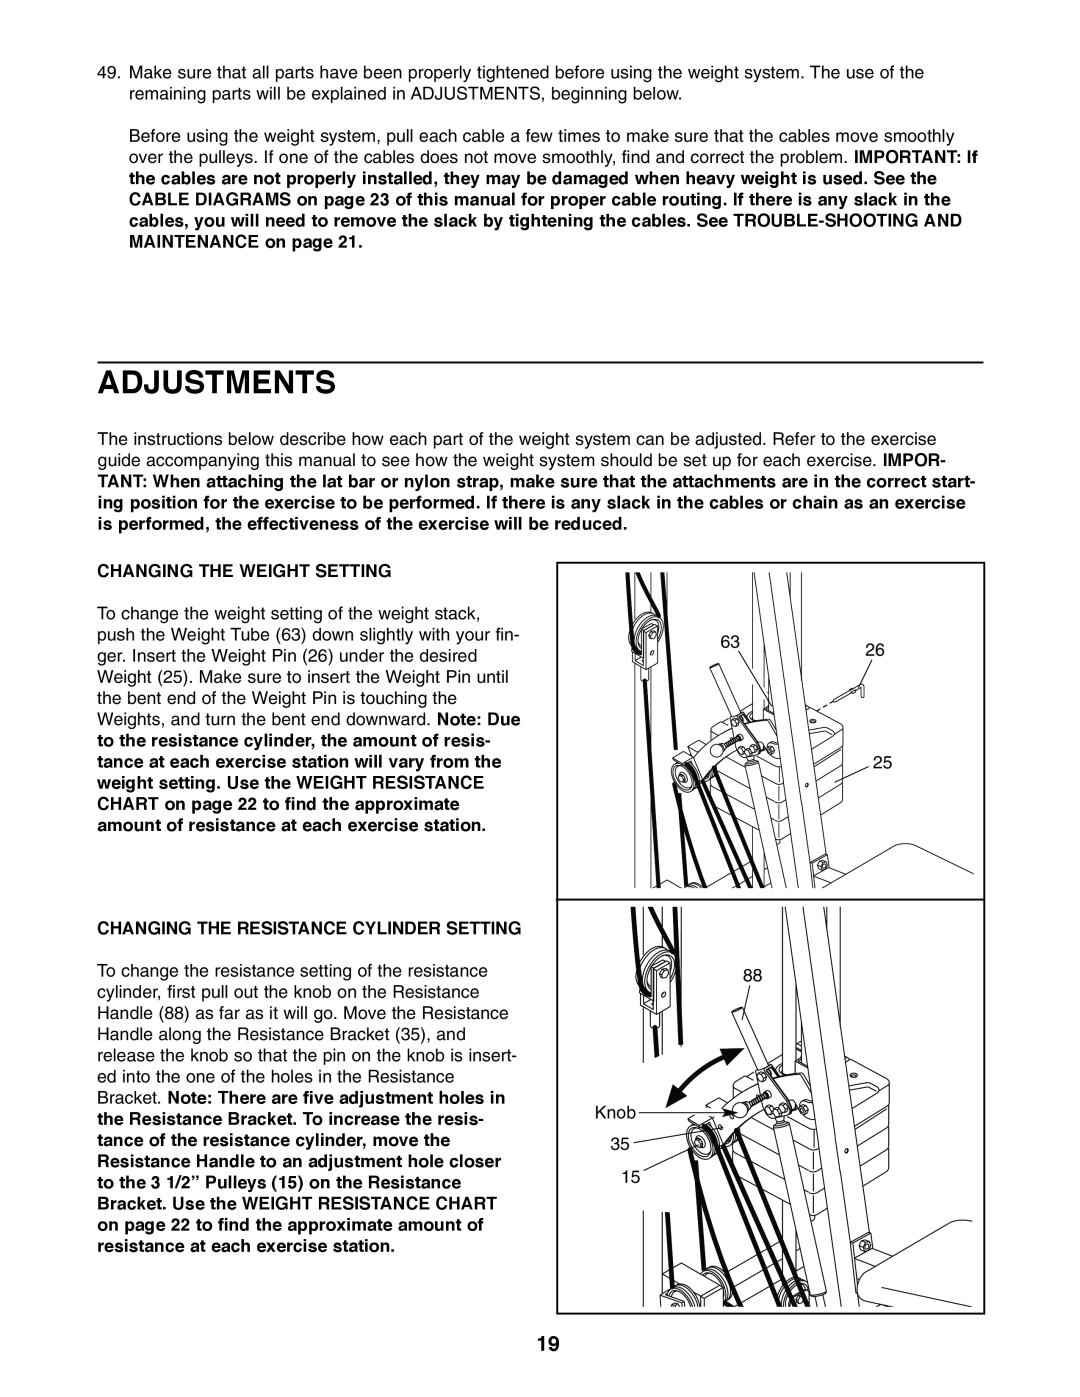 Weider WESY19610 user manual Adjustments, Changing The Weight Setting, Changing The Resistance Cylinder Setting 